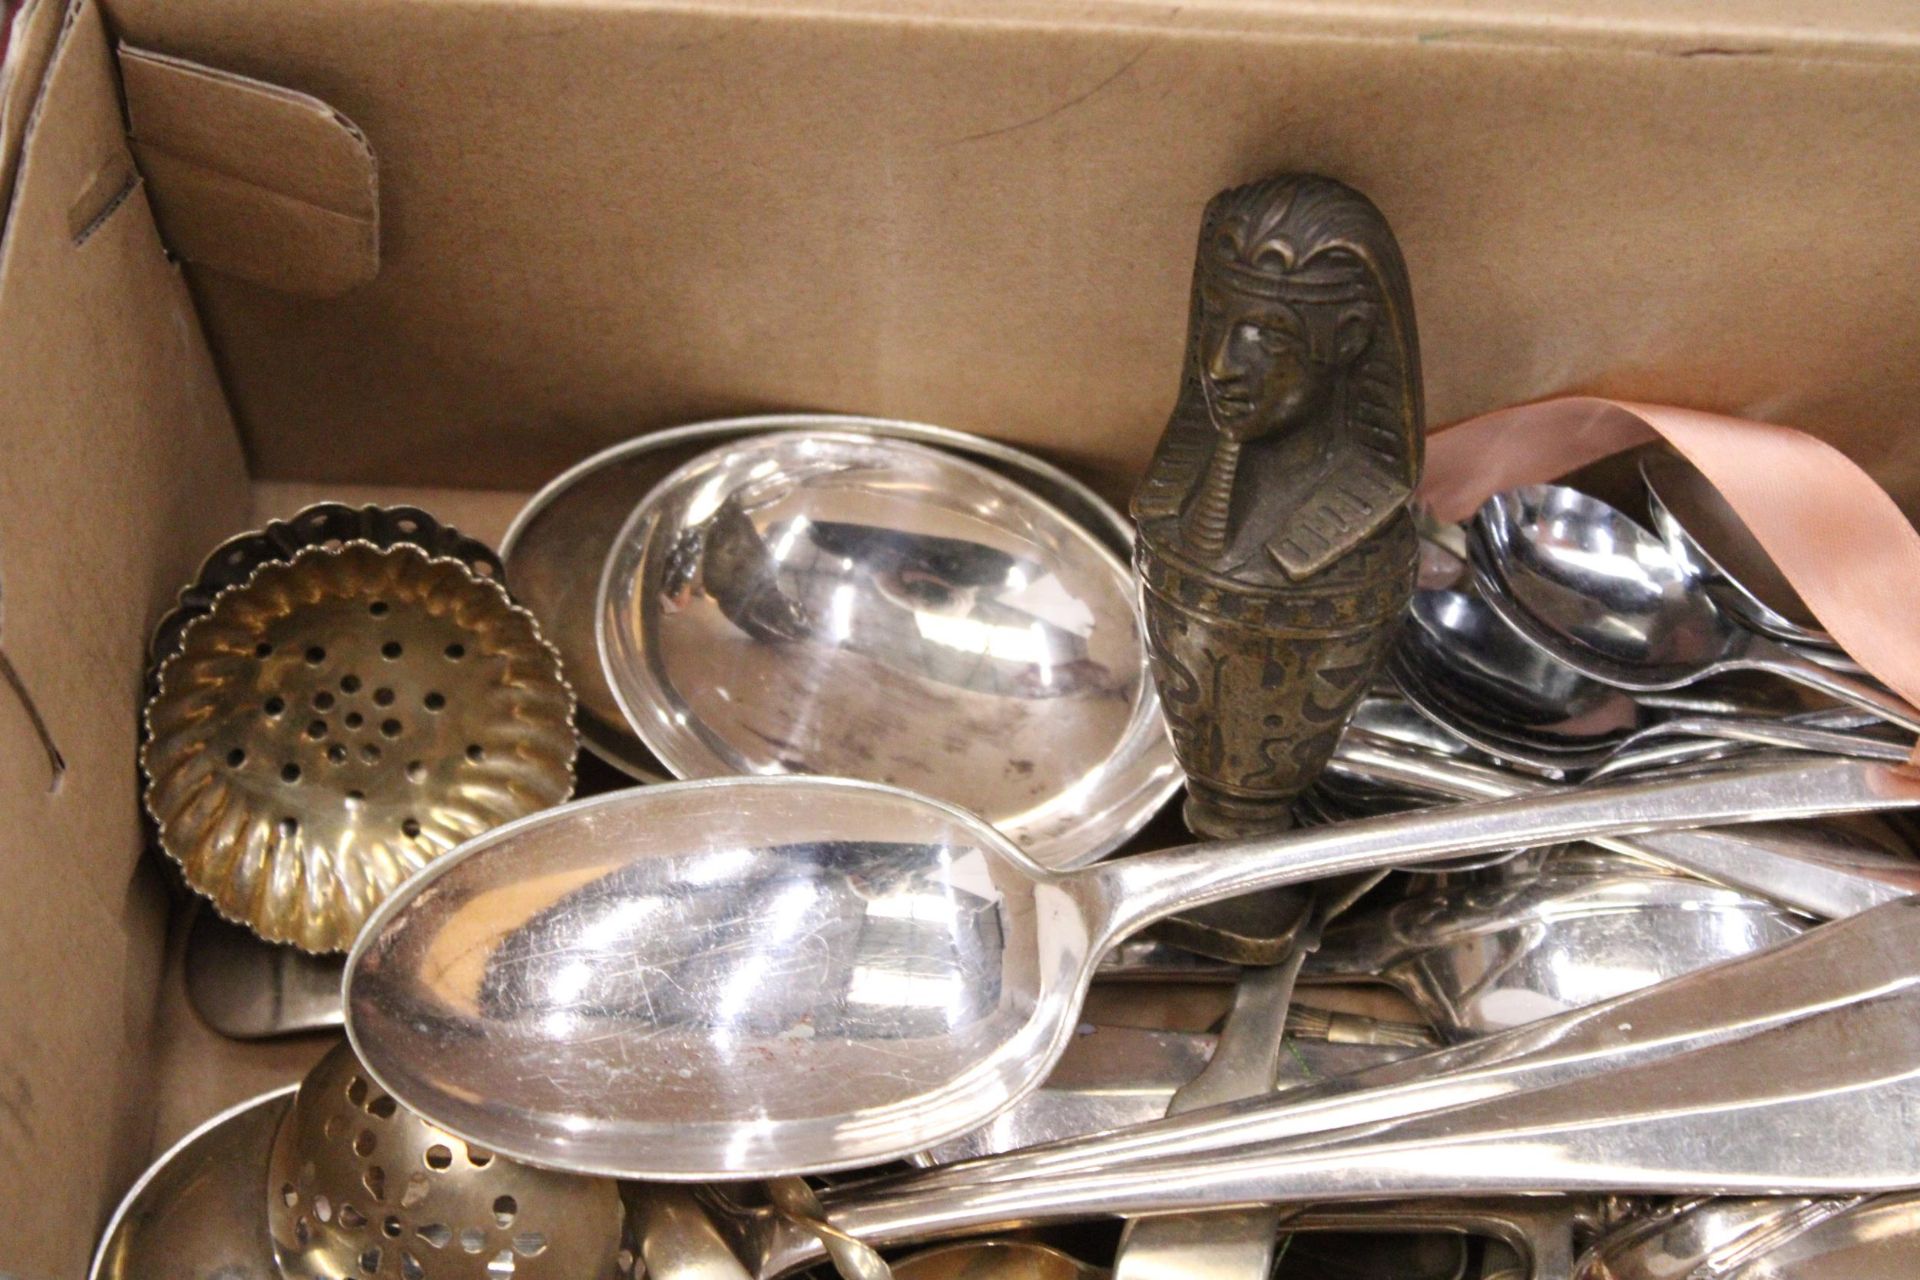 A QUANTITY OF VINTAGE FLATWARE TO INCLUDE LADELS, MUFFIN FORK, SUGAR SIFTERS, SPOONS, ETC - Image 3 of 5